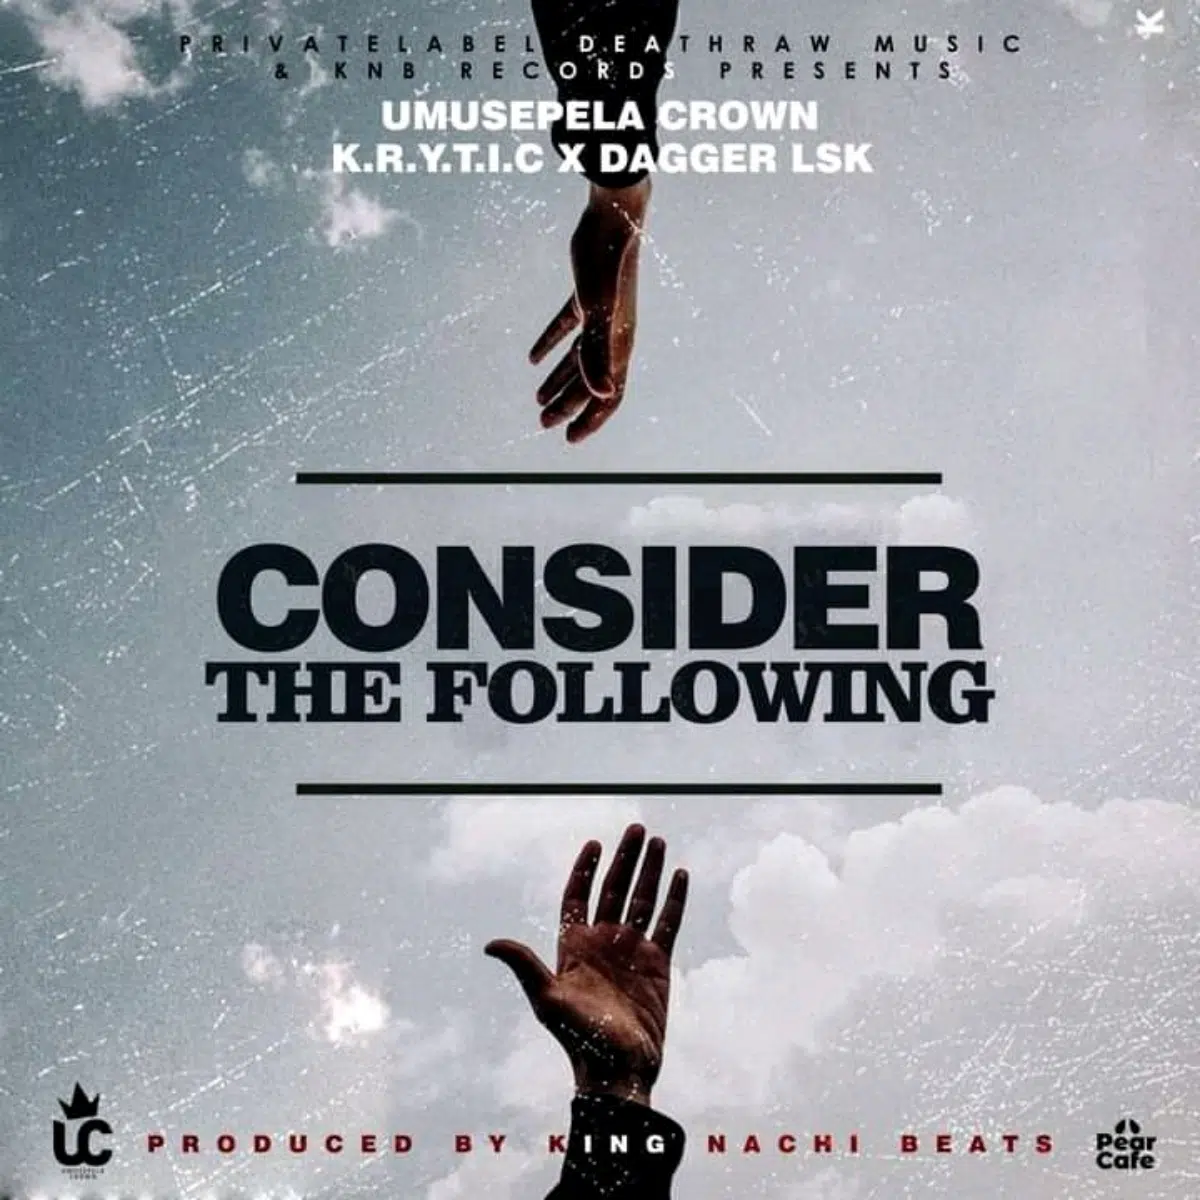 DOWNLOAD: Umusepela Crown Feat Krytic & Dagger LSK – “Consider The Following” Mp3